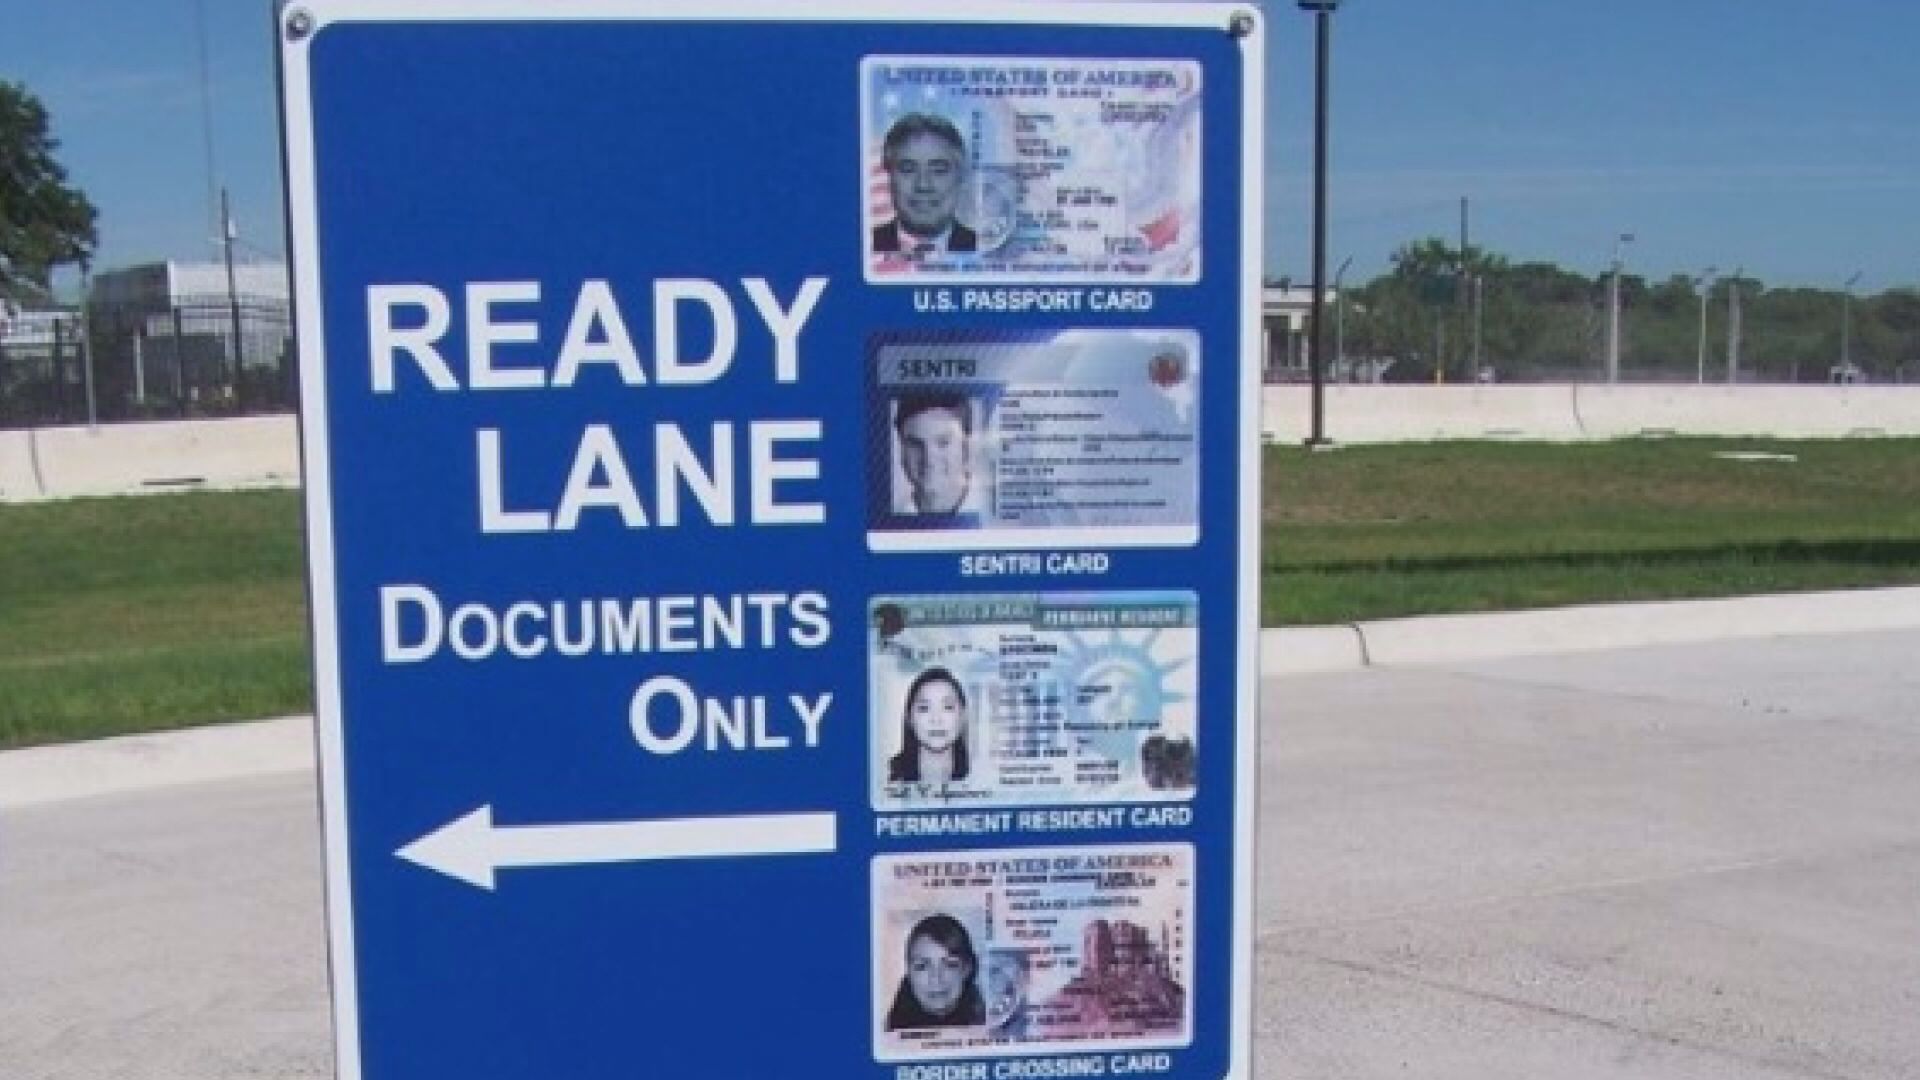 Find out what documents allow you to use the Ready Lane at the